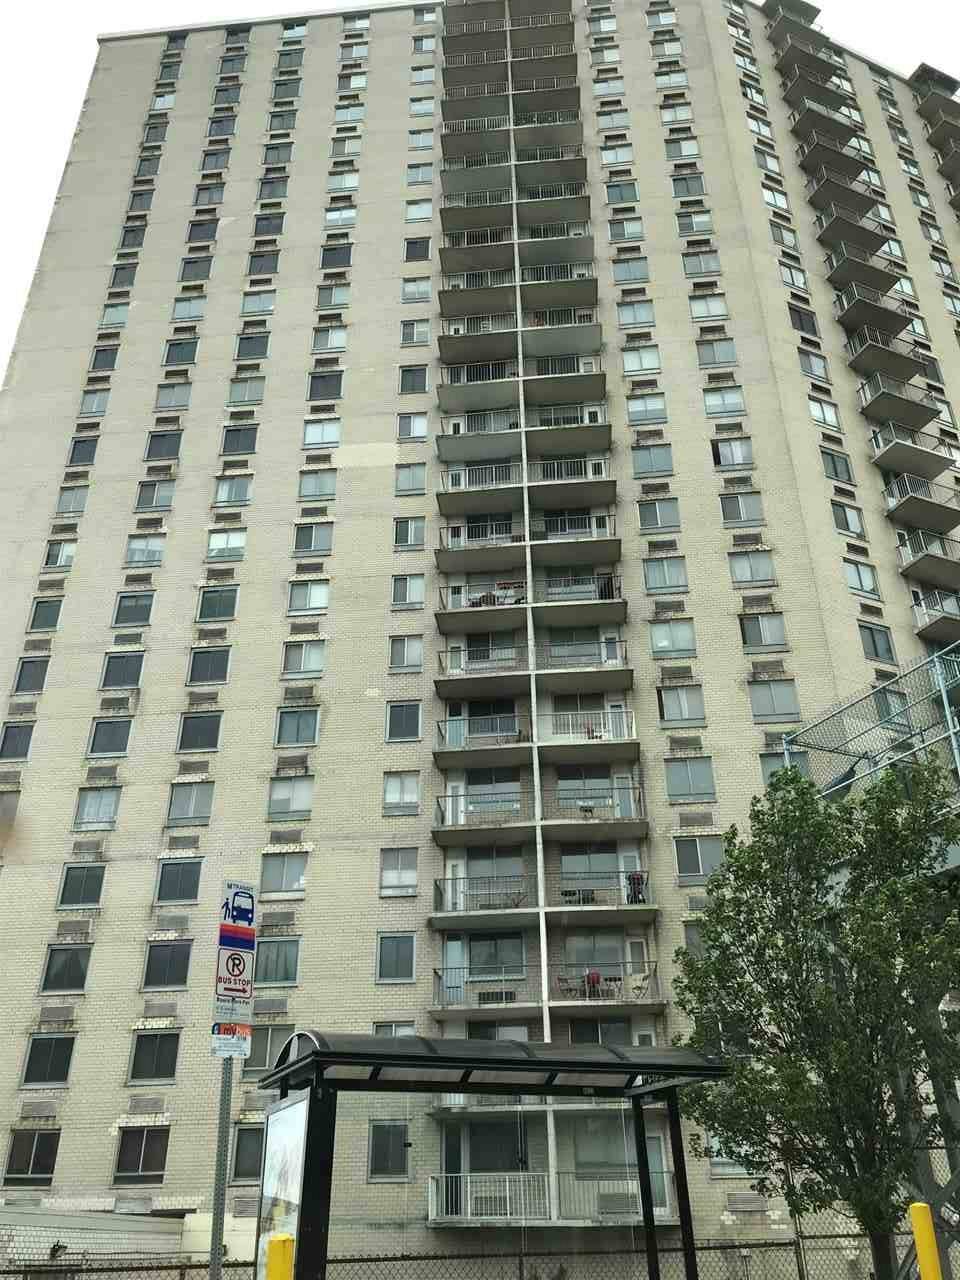 PRICE REDUCTION - 2 BR The Heights New Jersey